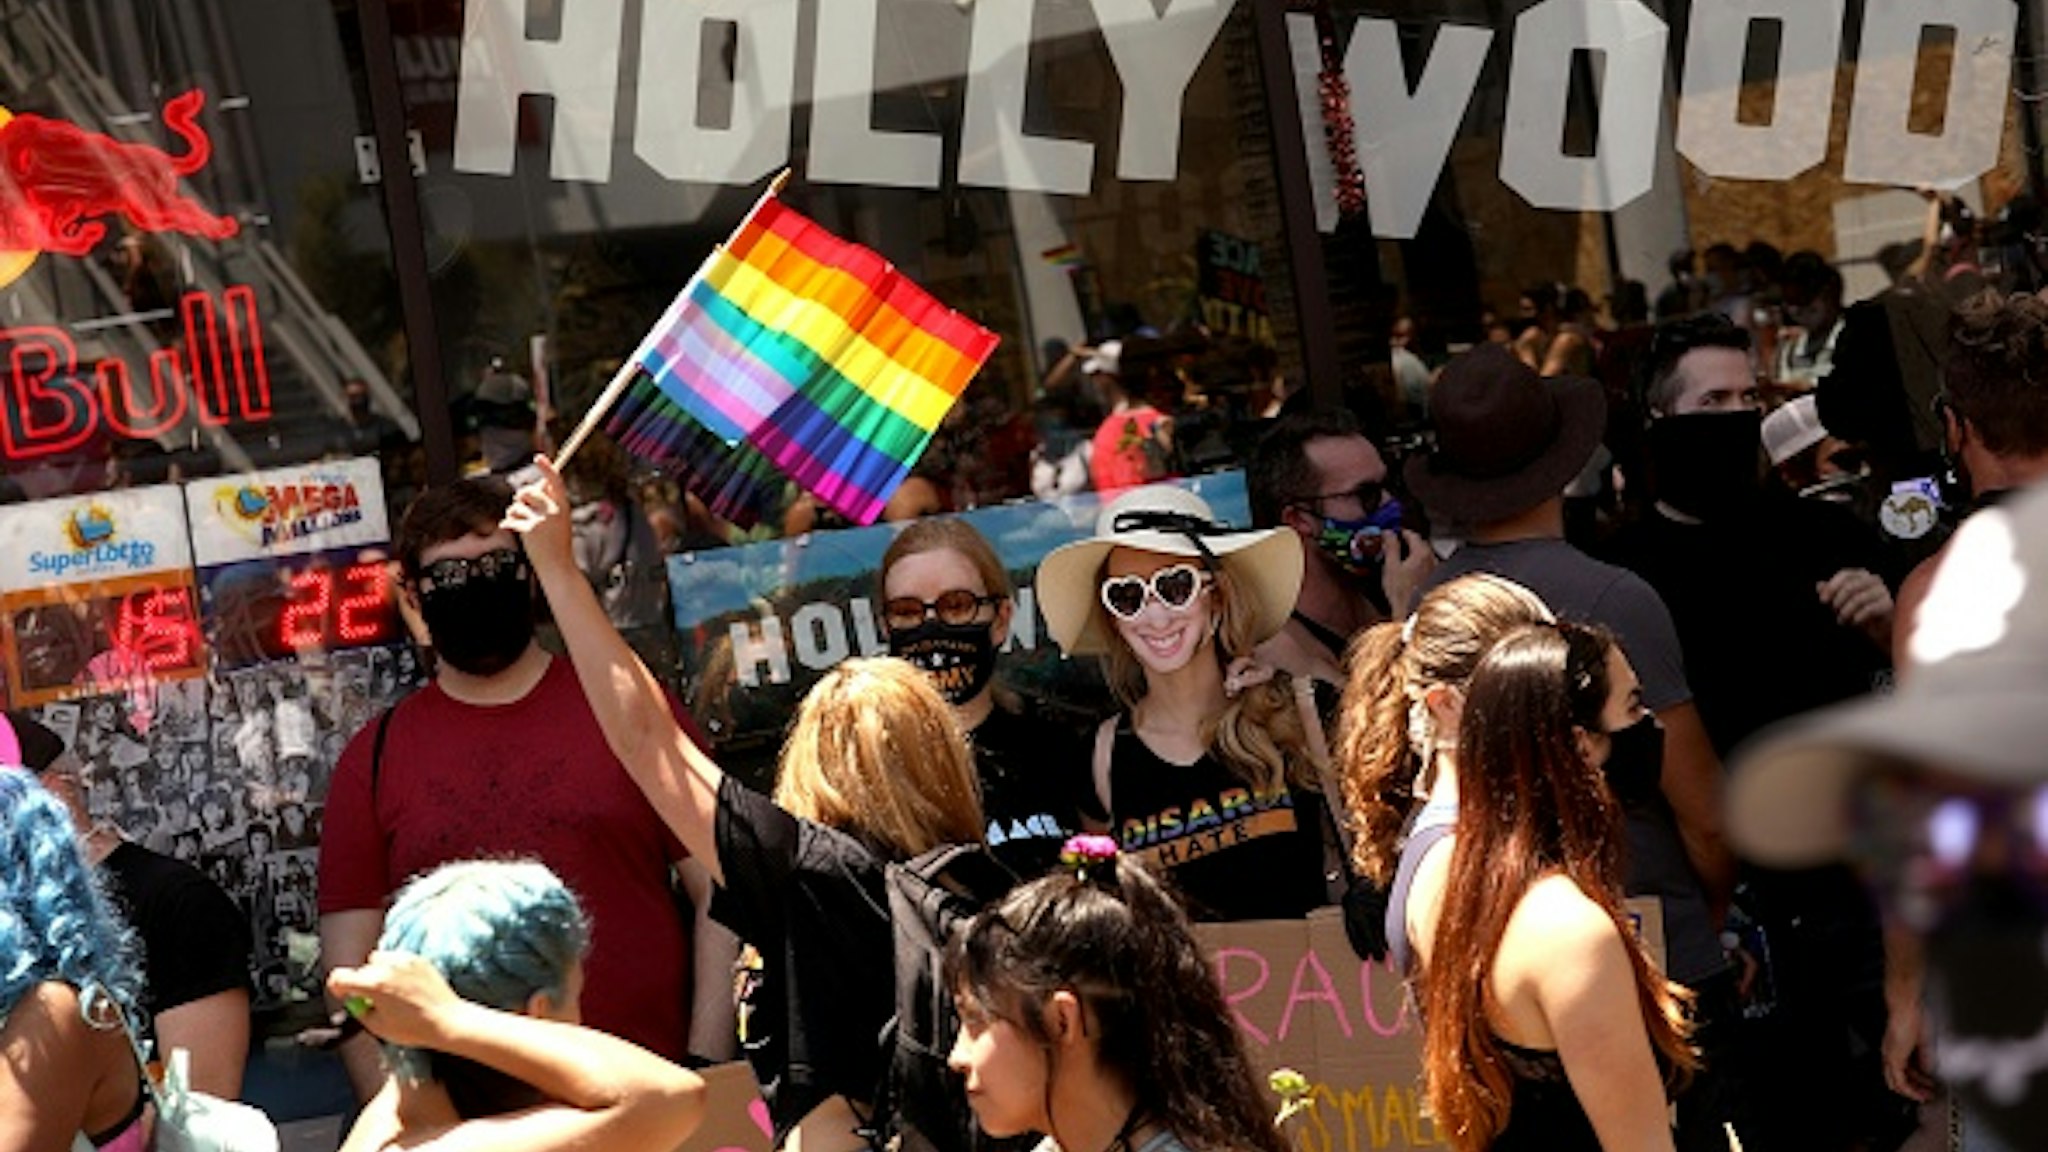 HOLLYWOOD, CA - JUNE 14, 2020 - - Thousands participate in the All Black Lives Matter solidarity march to mark LGBTQ Pride Month along Hollywood Blvd. in Hollywood on June 14, 2020. The march also honored Tony McDade, a transgender man killed by Tallahassee Police Department officers on May 27. The march is in solidarity with the Black Lives Matter movement and highlight the contributions of people of color who were instrumental in organizing the LGBT movement, such as Marsha P. Johnson and Sylvia Rivera. The procession started on Hollywood Boulevard at Highland Avenue in Hollywood.